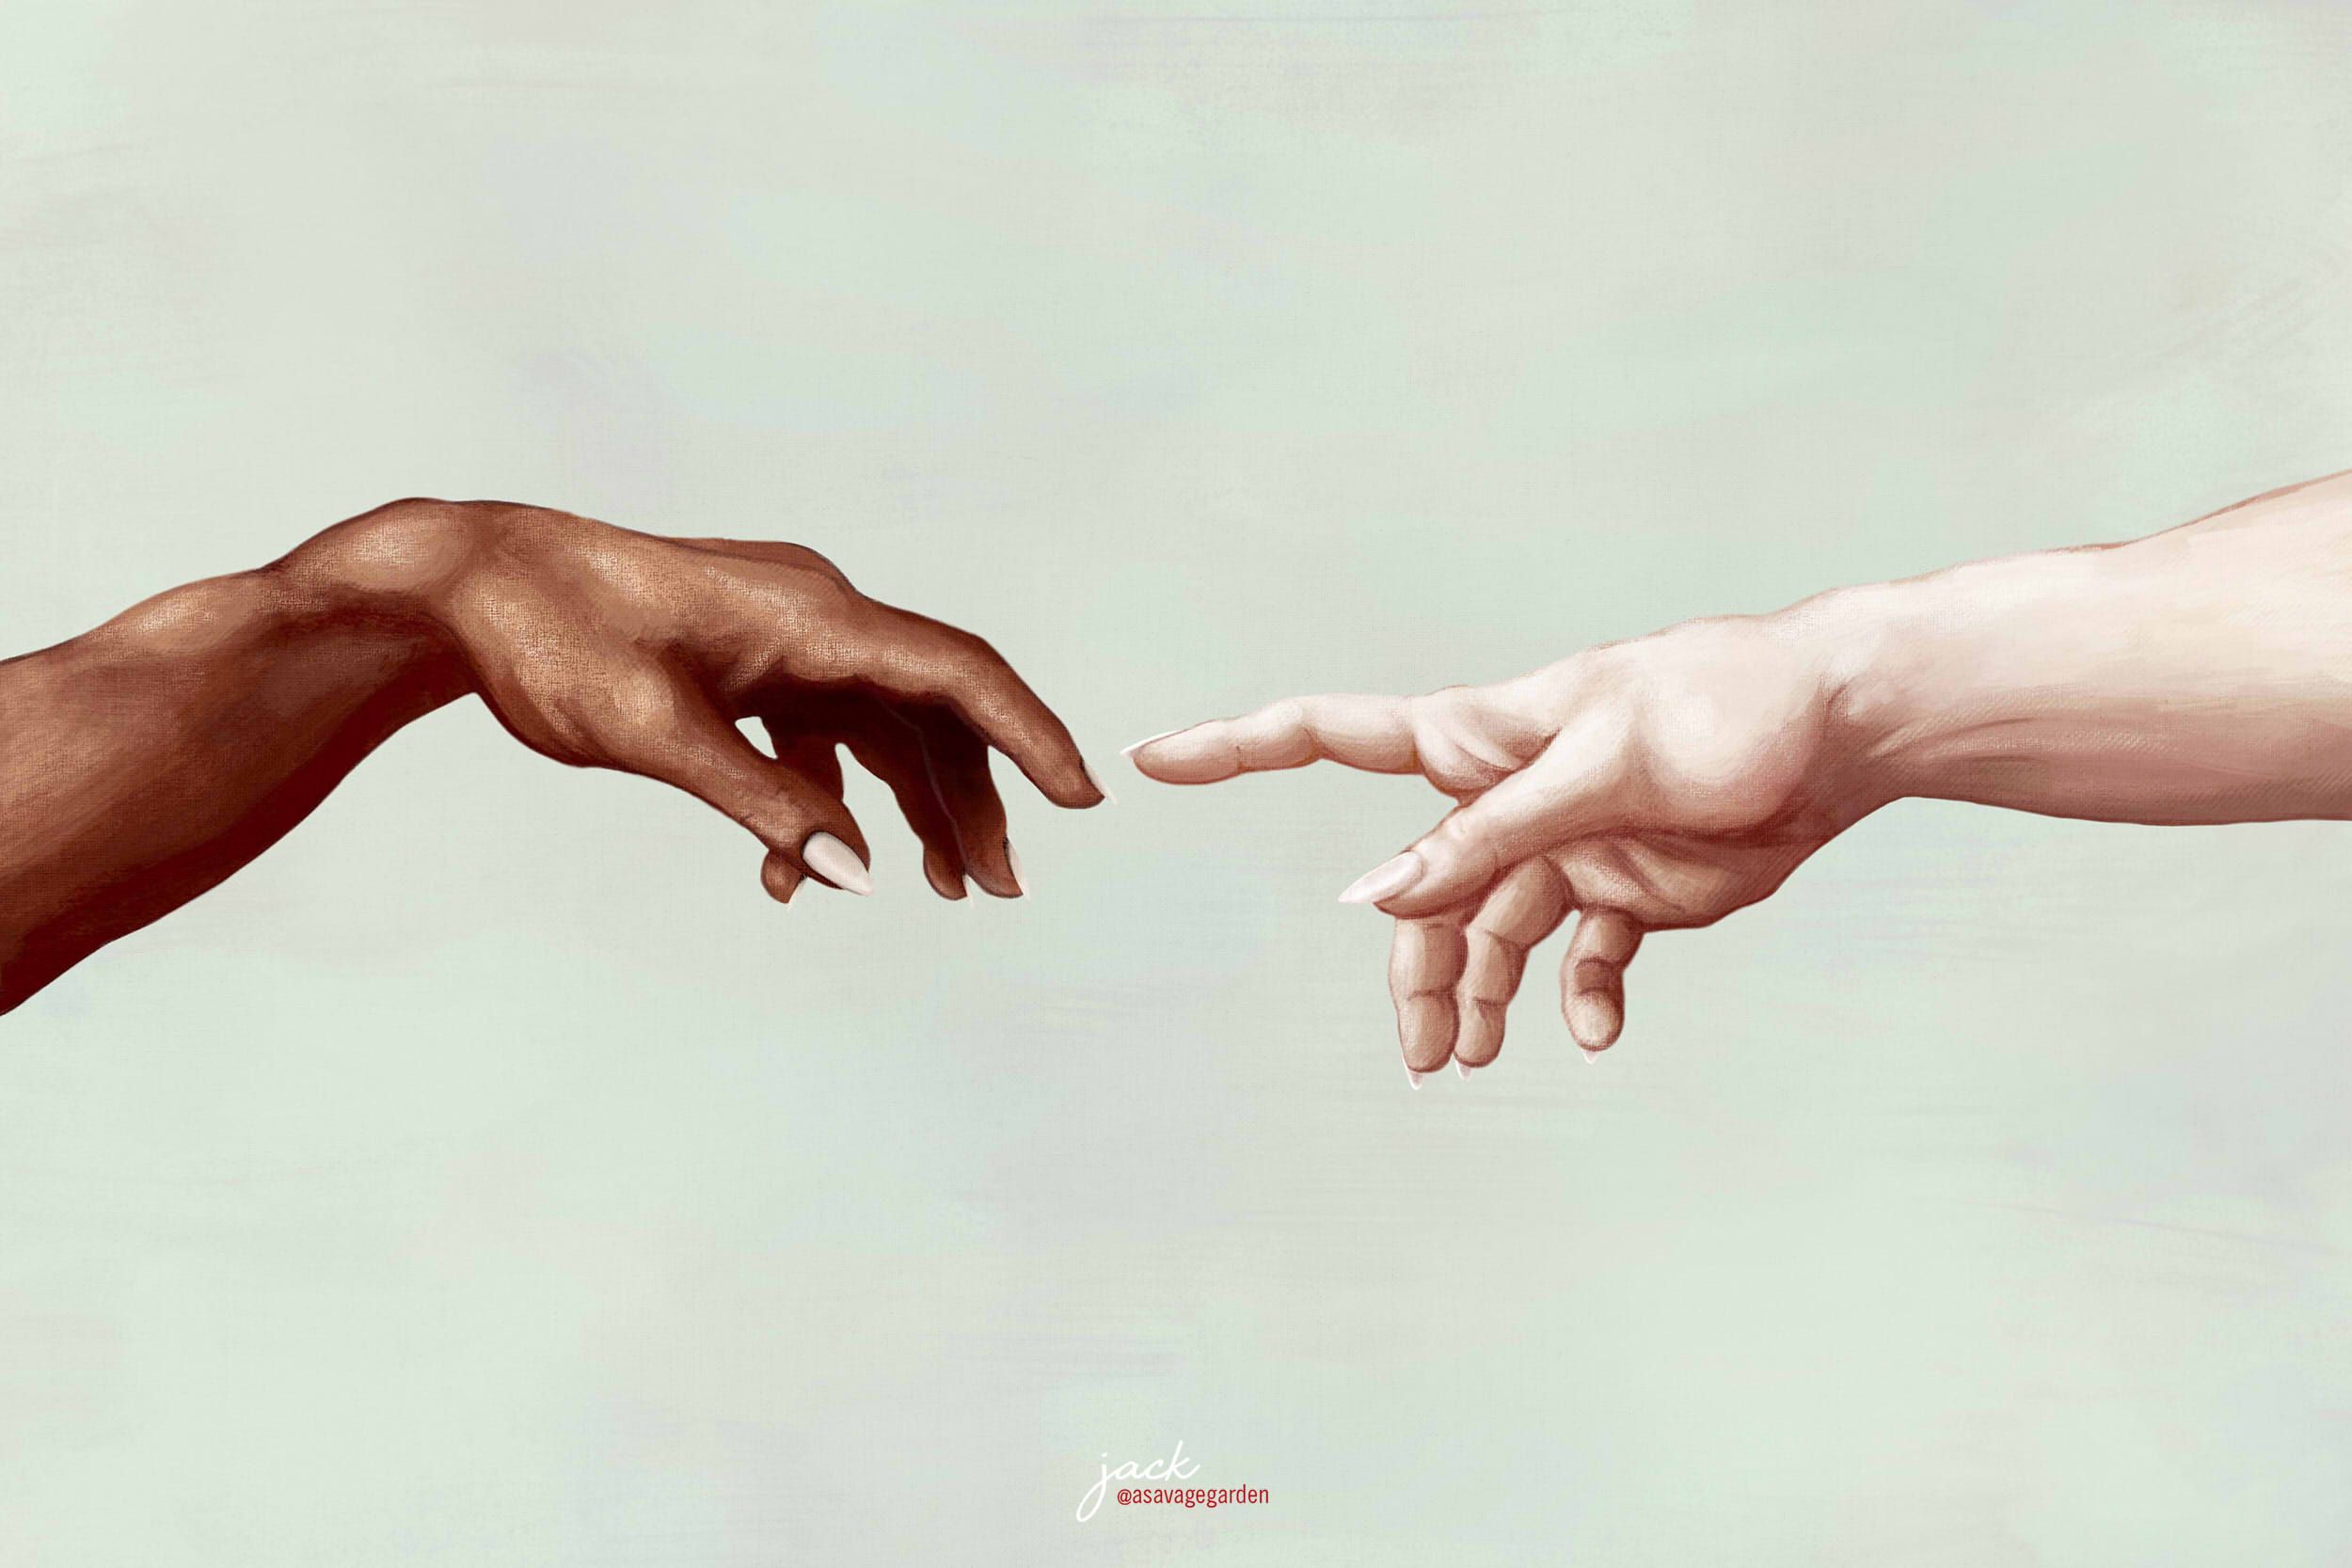 A painting of two hands reaching out to each other, one black and one white. - The Creation of Adam